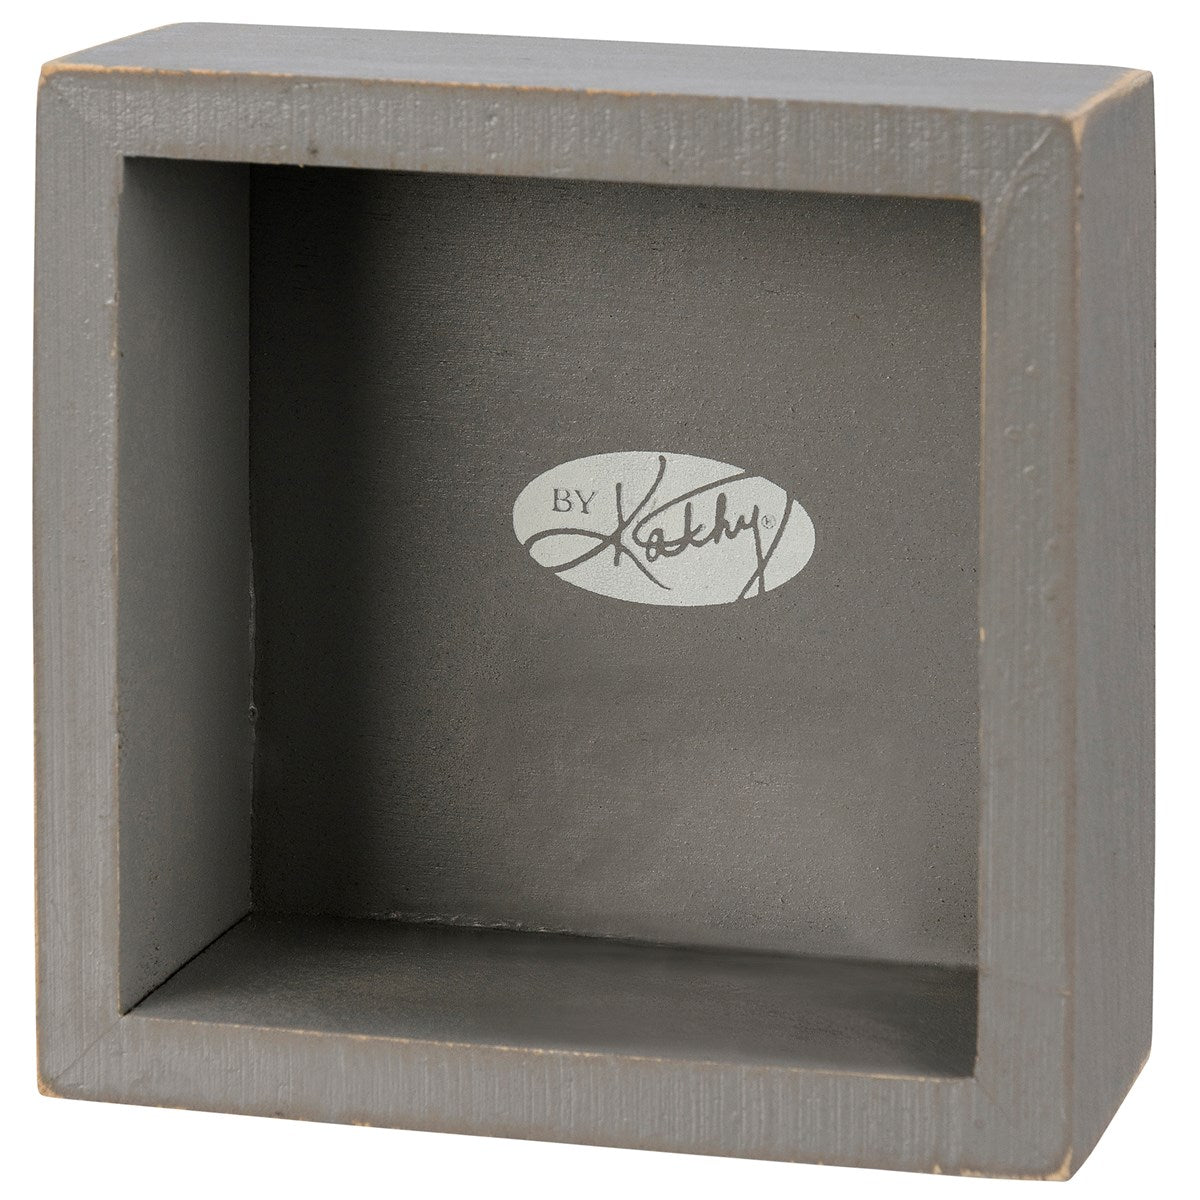 Home Office Gray Box Sign Set | Co-worker Gifts | 4" x 4"